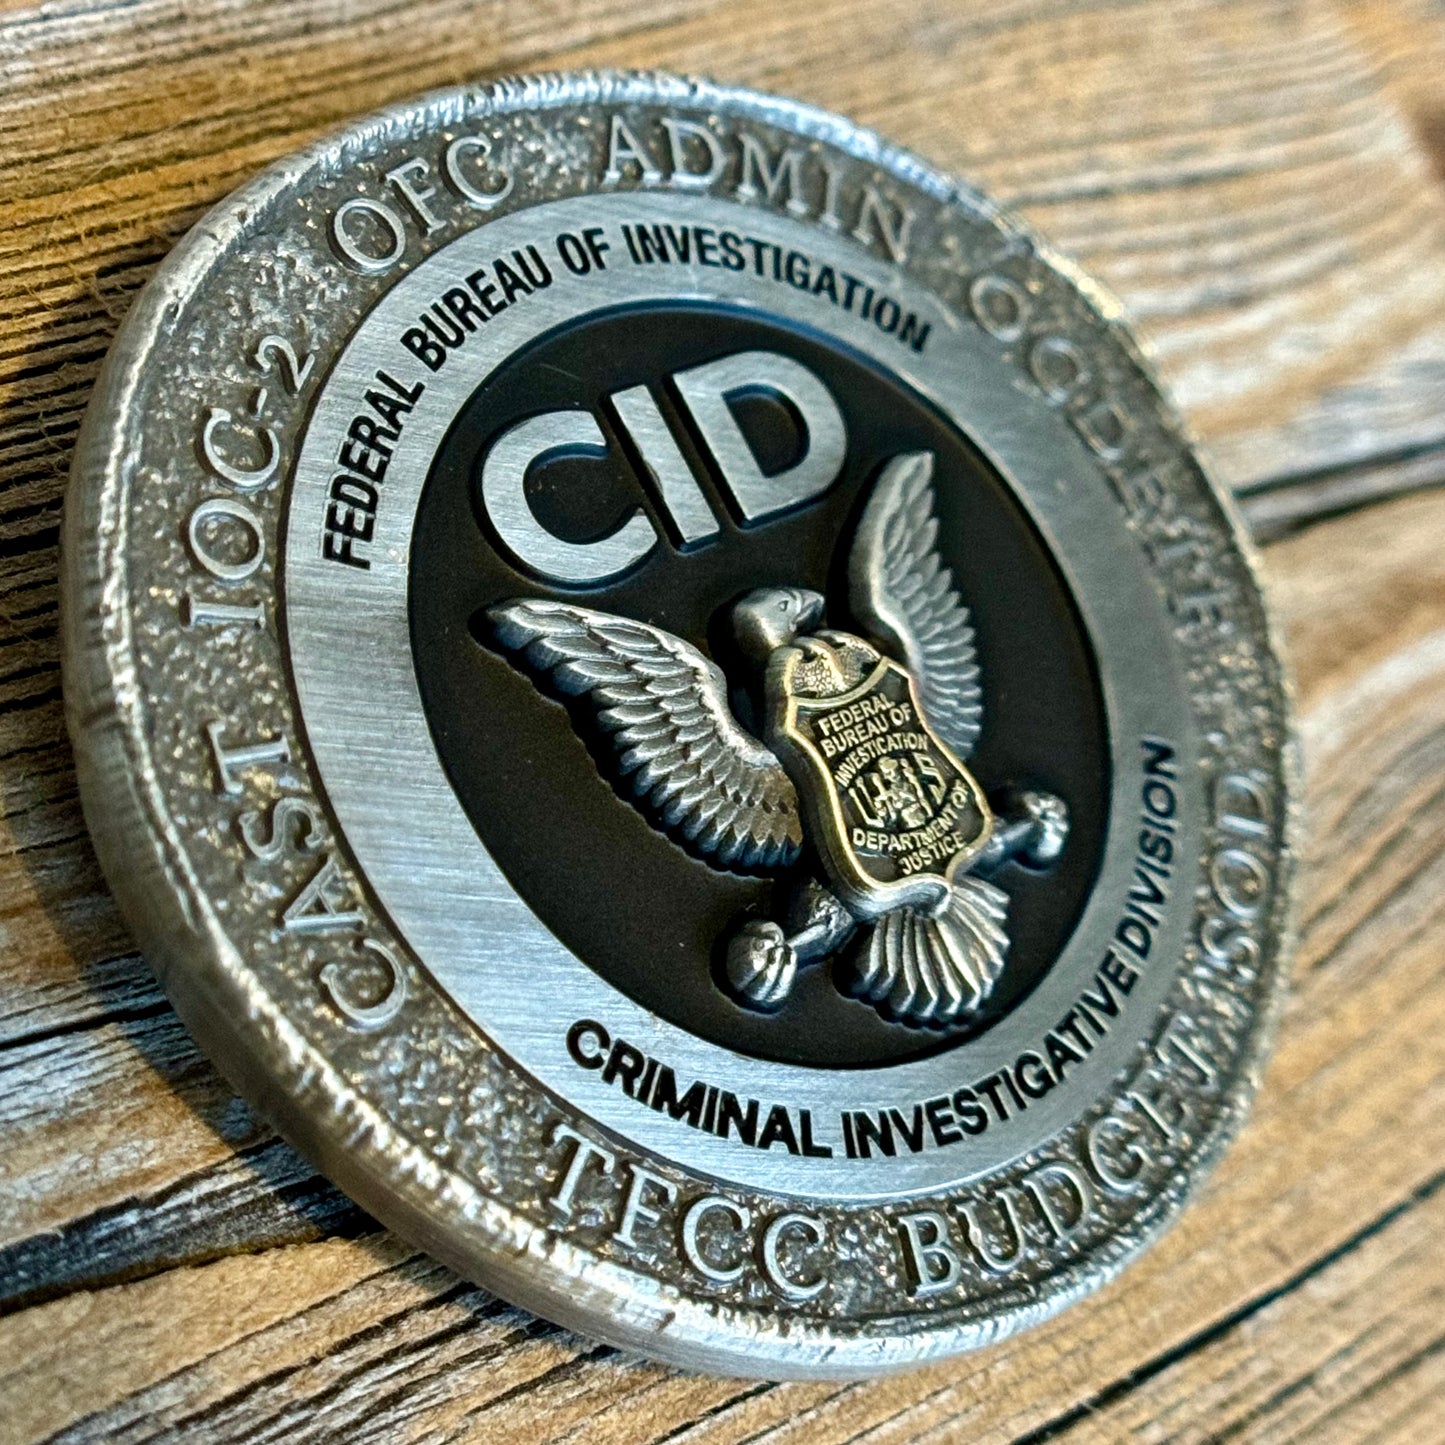 Federal Bureau of Investigation (FBI), Headquarters - Operational Support Section Challenge Coin Set